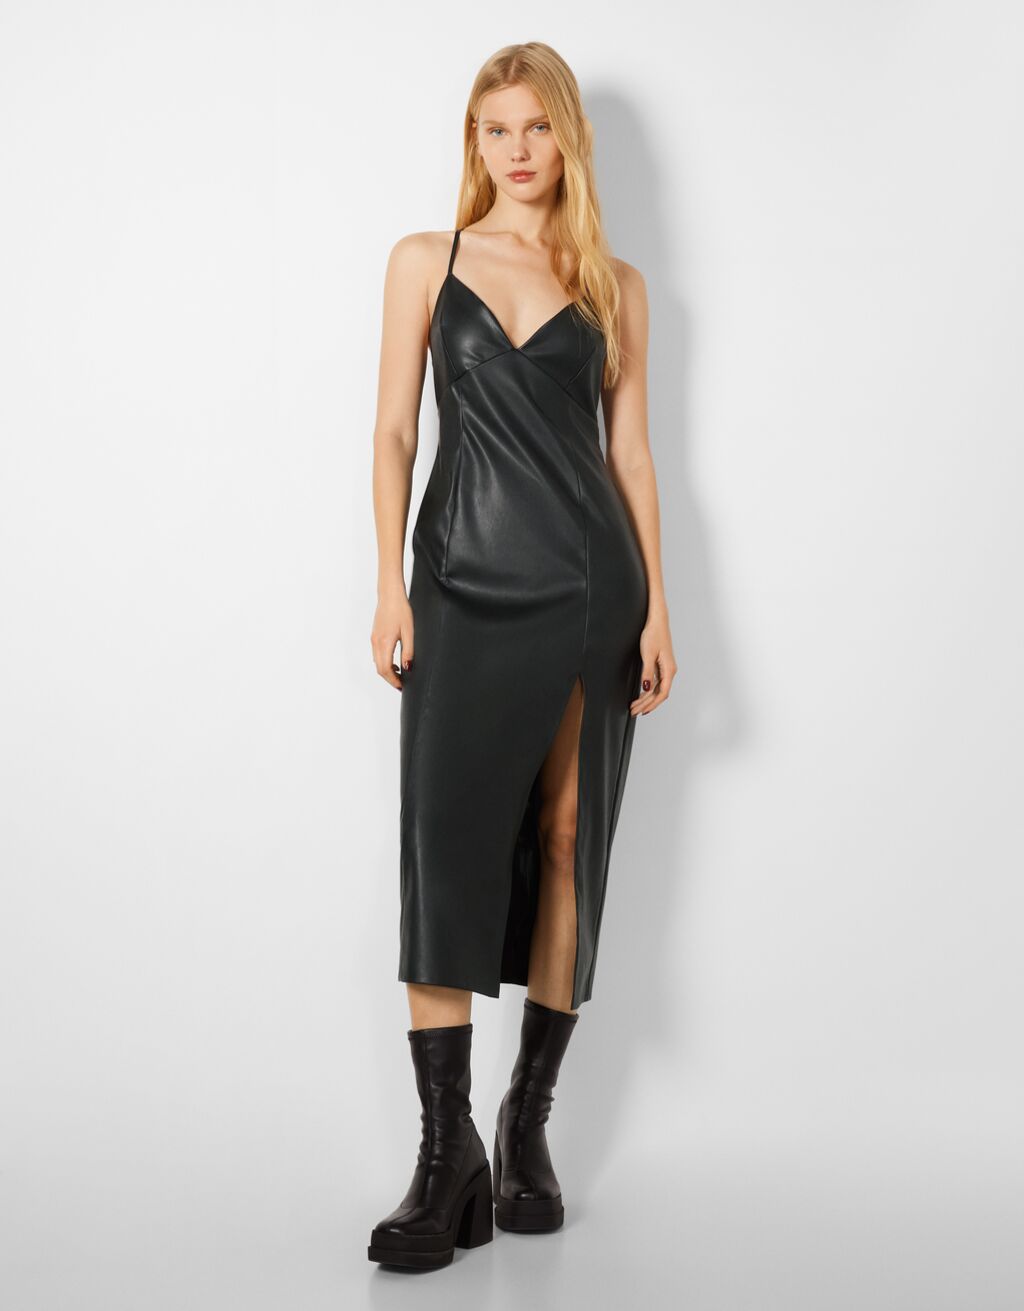 Long strappy faux leather dress with side slit